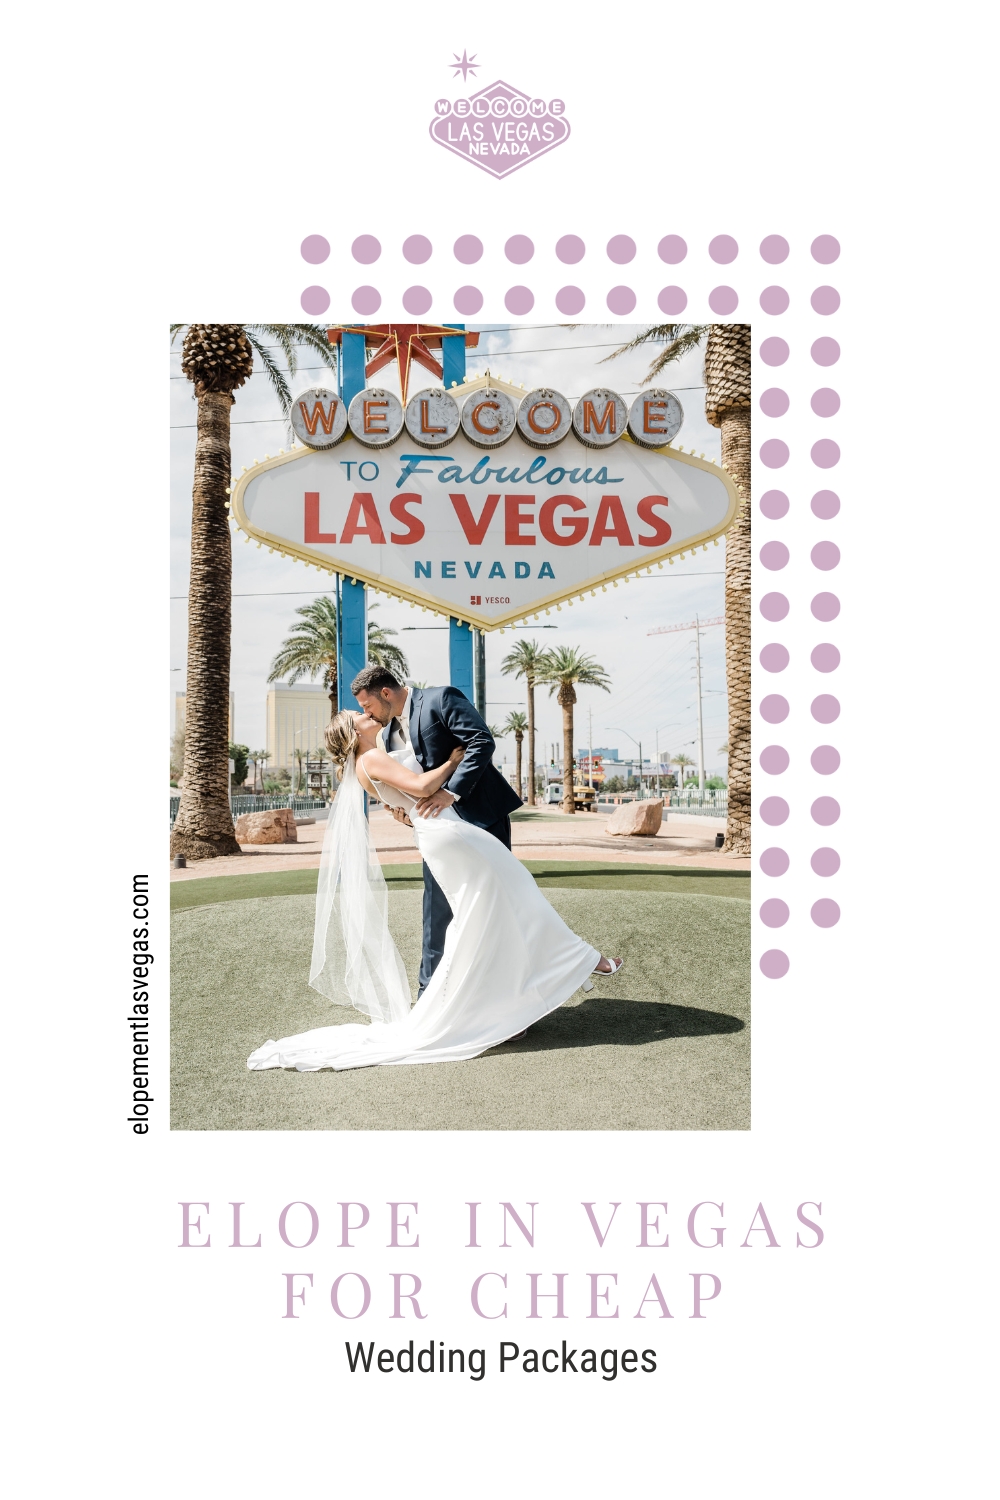 Bride and groom sharing a kiss in front of Las Vegas sign; image overlaid with text that reads Elope in Vegas for Cheap Wedding Packages